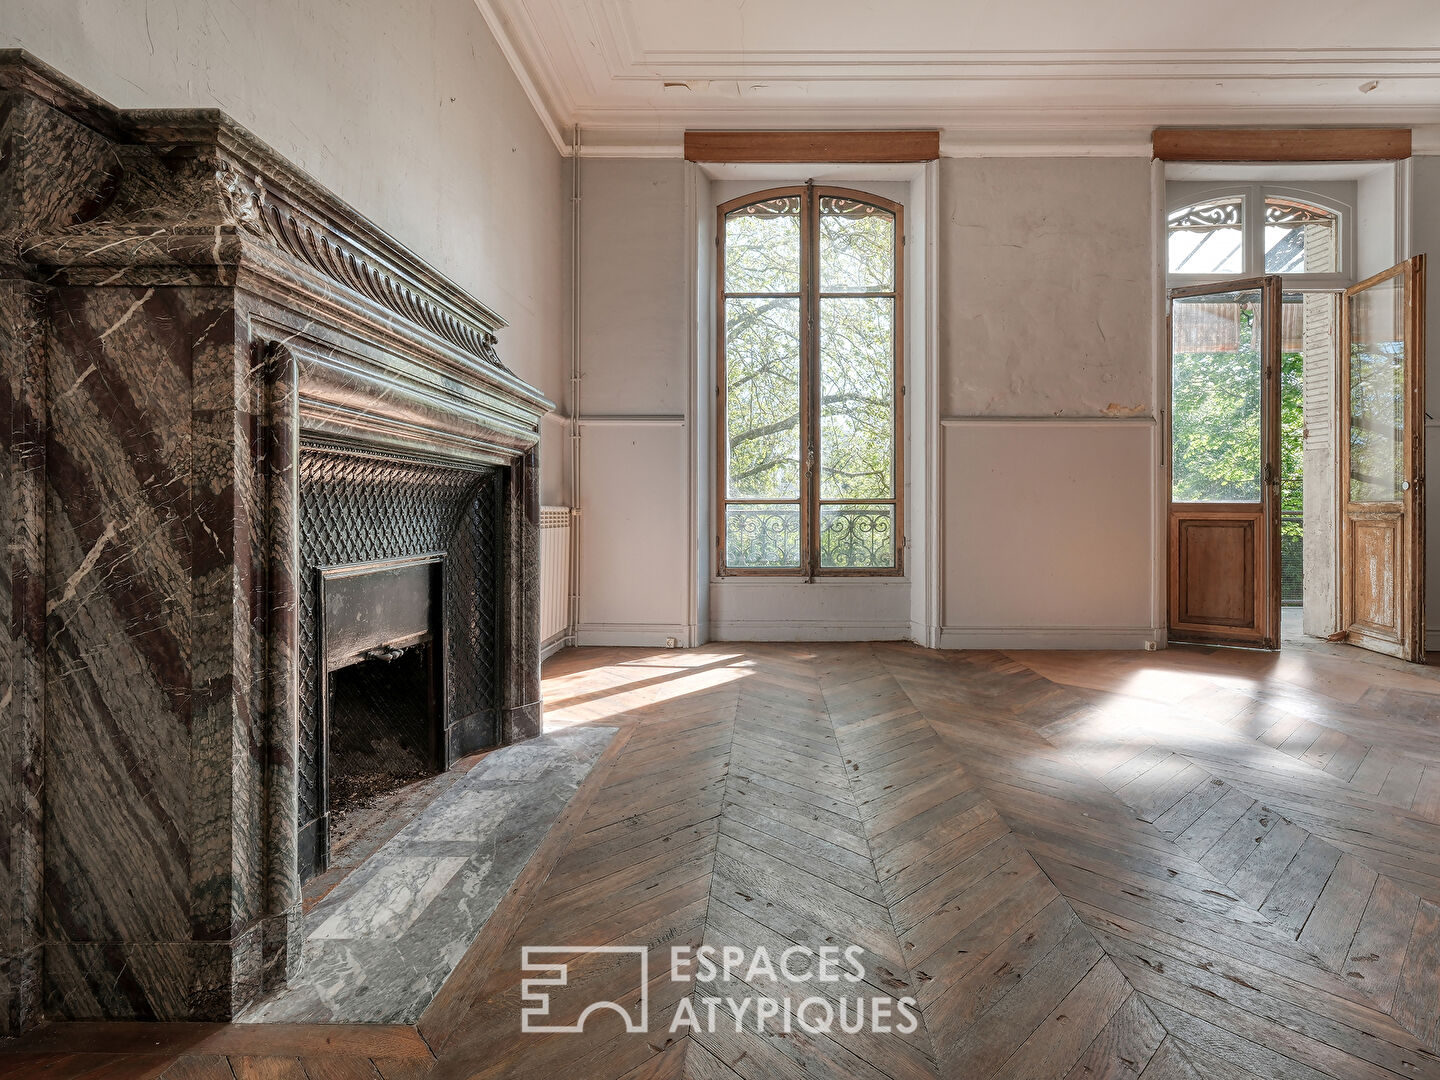 Property from the beginning of the 20th century in the heart of Montargis to rehabilitate